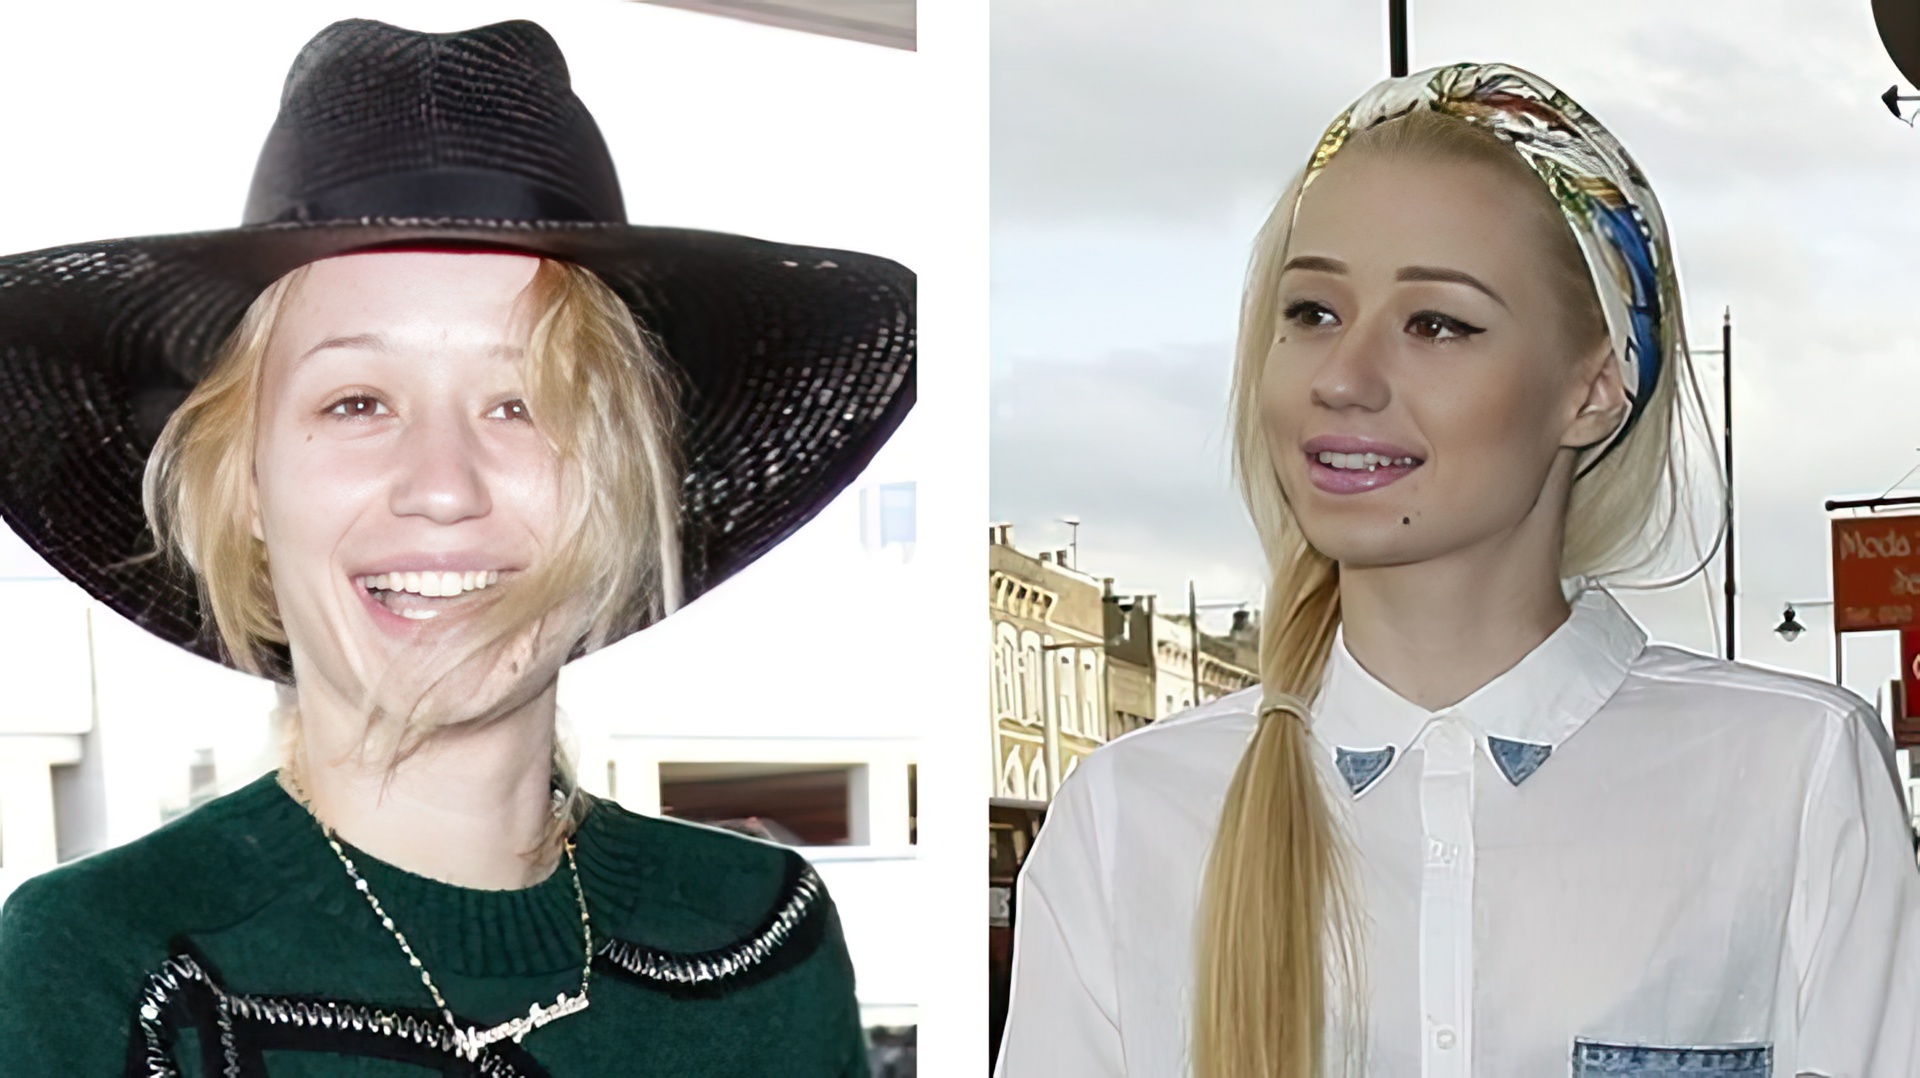 At the age of 16, Iggy moved independently to America